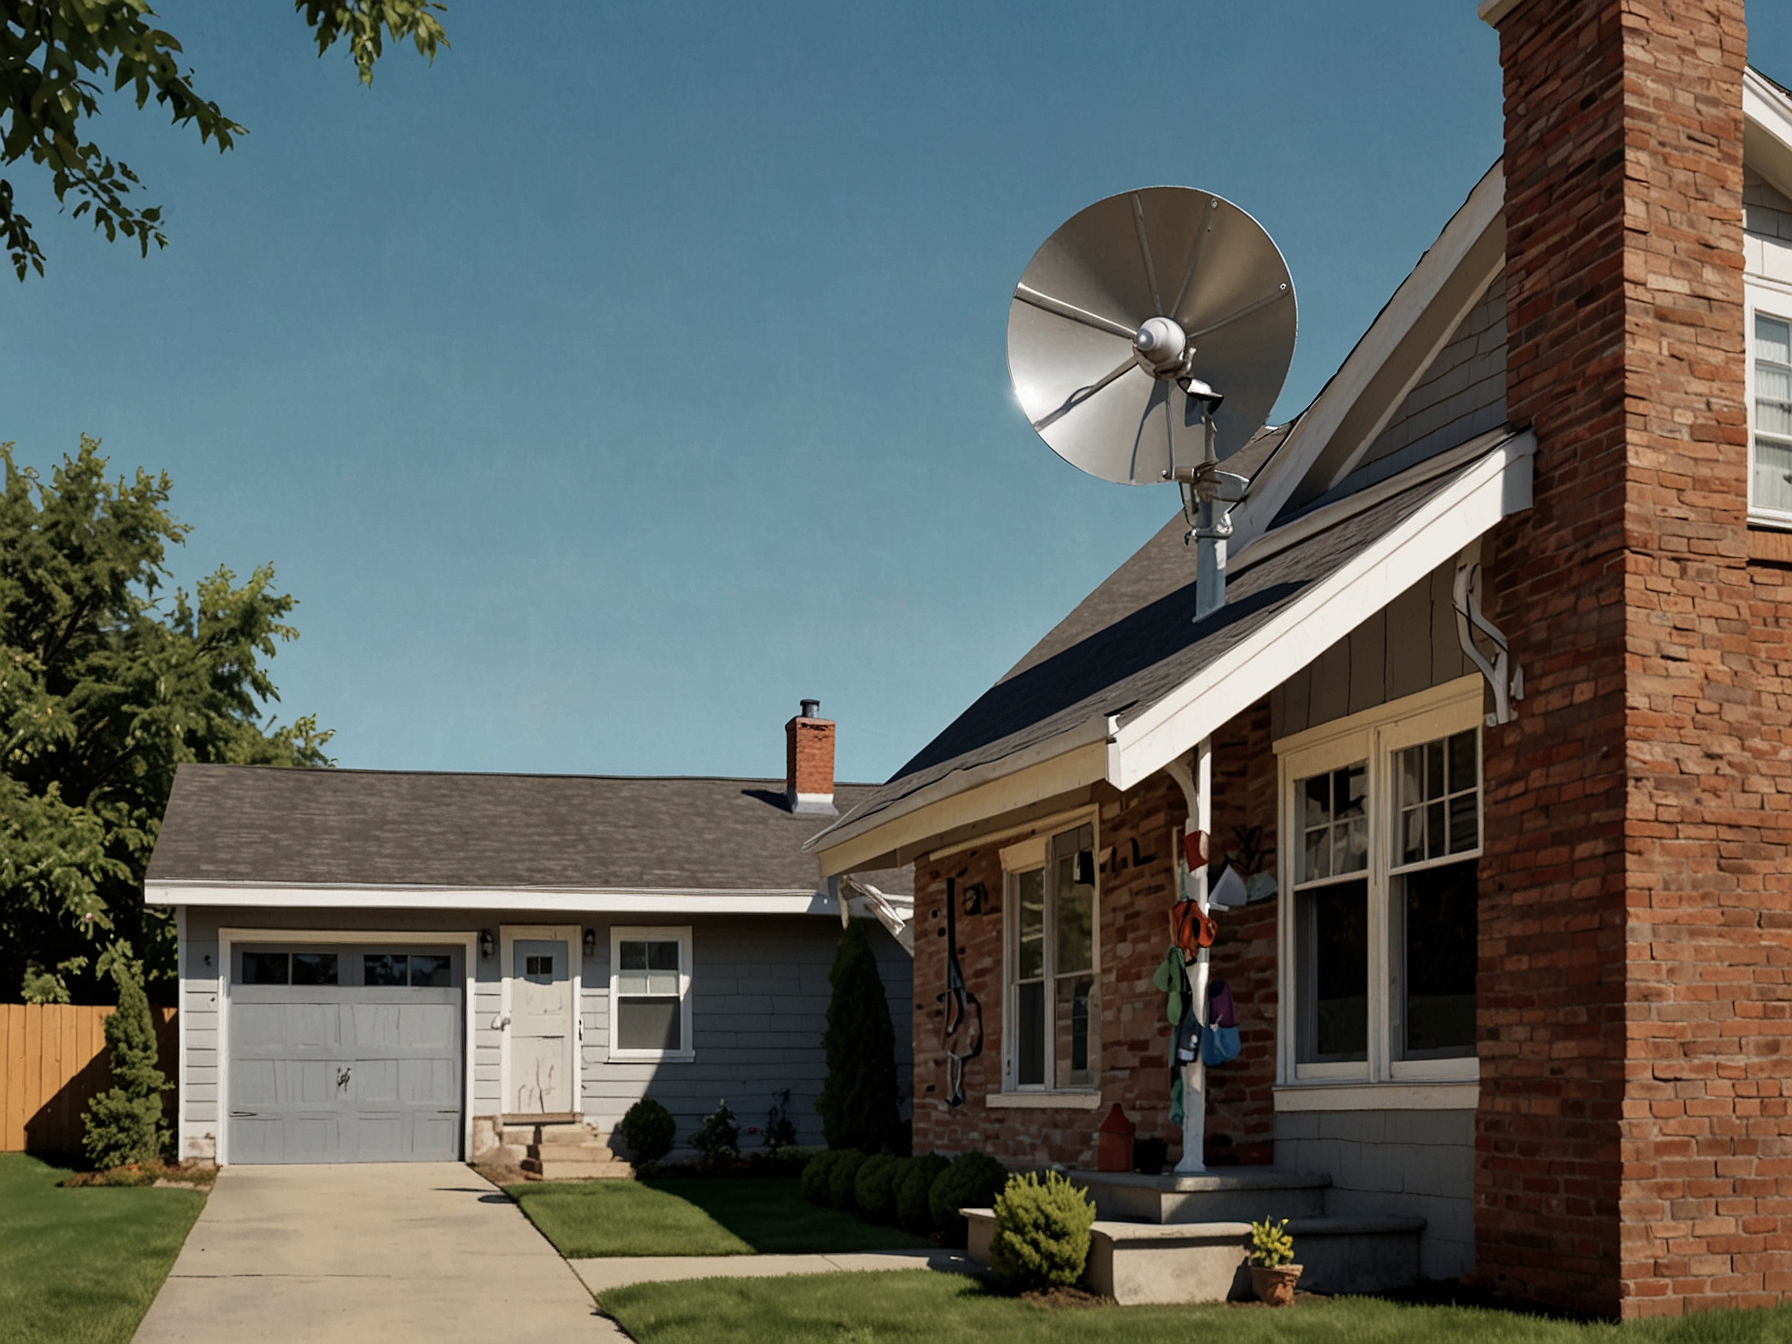 A DirecTV dish on a suburban house, symbolizing the exclusivity of the 'Sunday Ticket' package. Additional graphics illustrate the financial burden and market limitations discussed in the lawsuit.